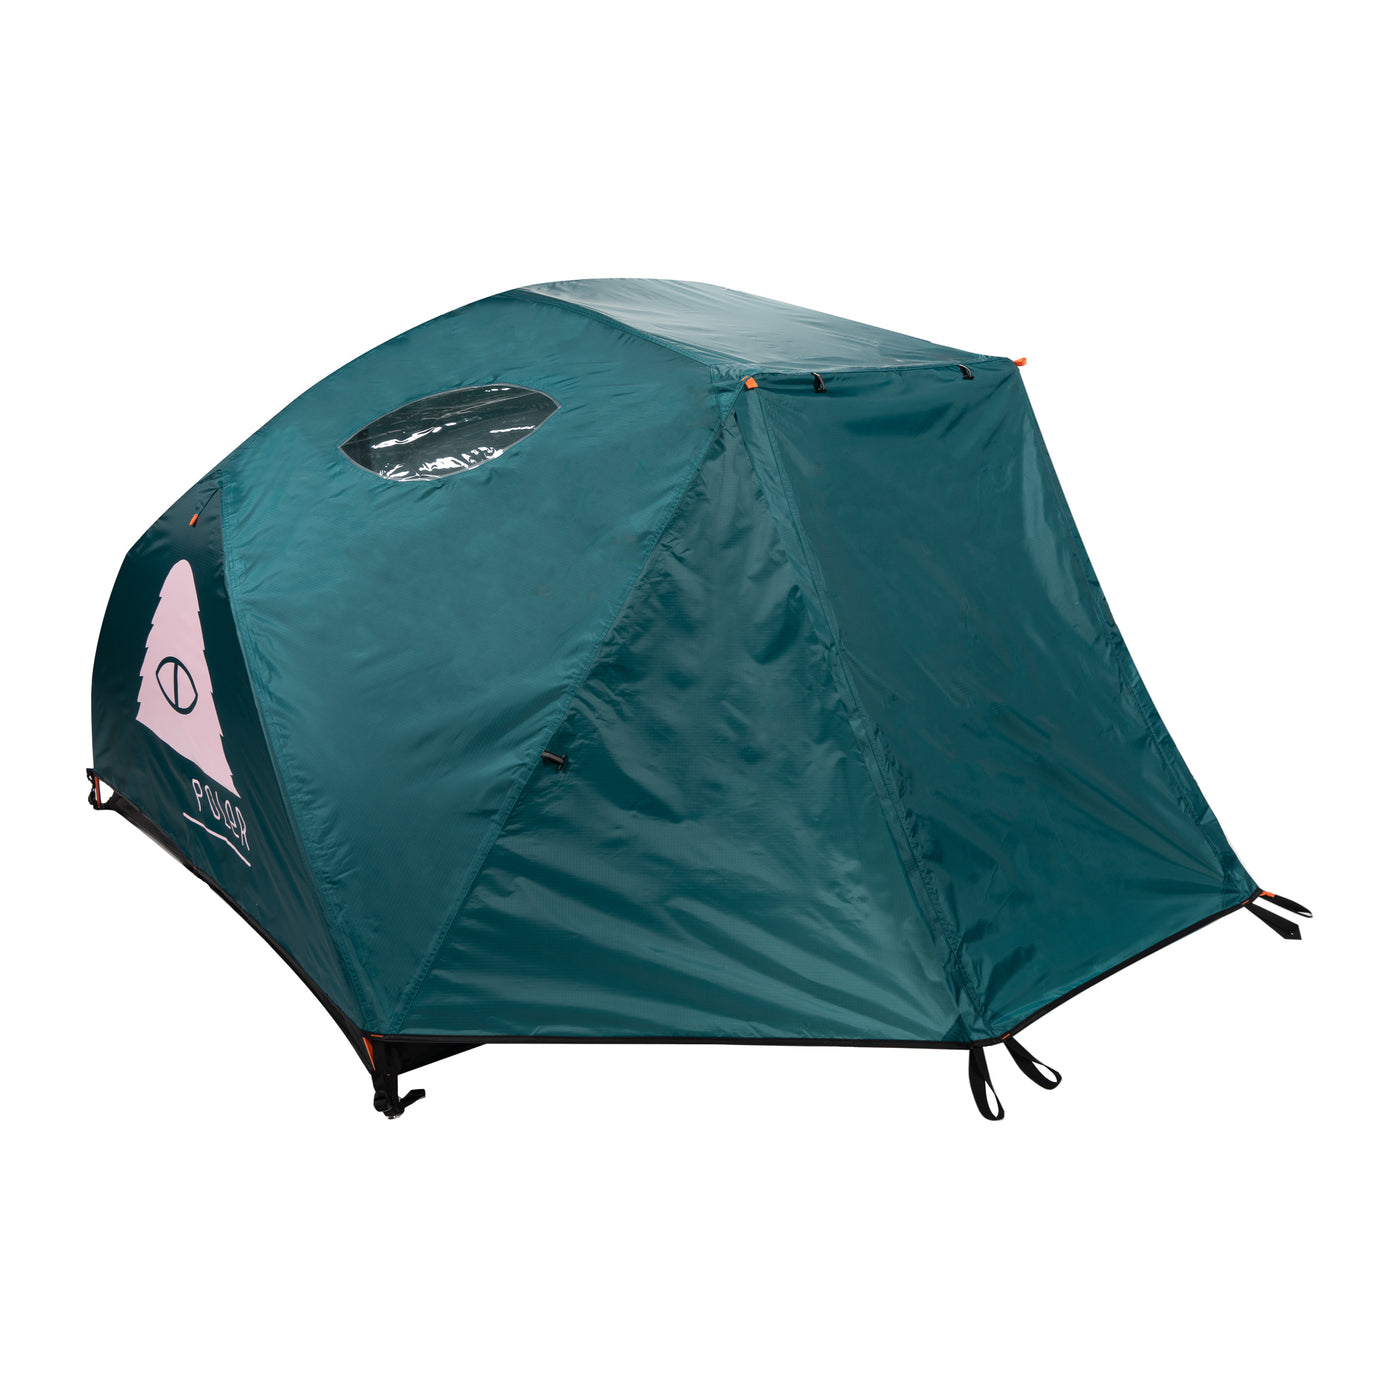 2 Person Tent - Gumball    